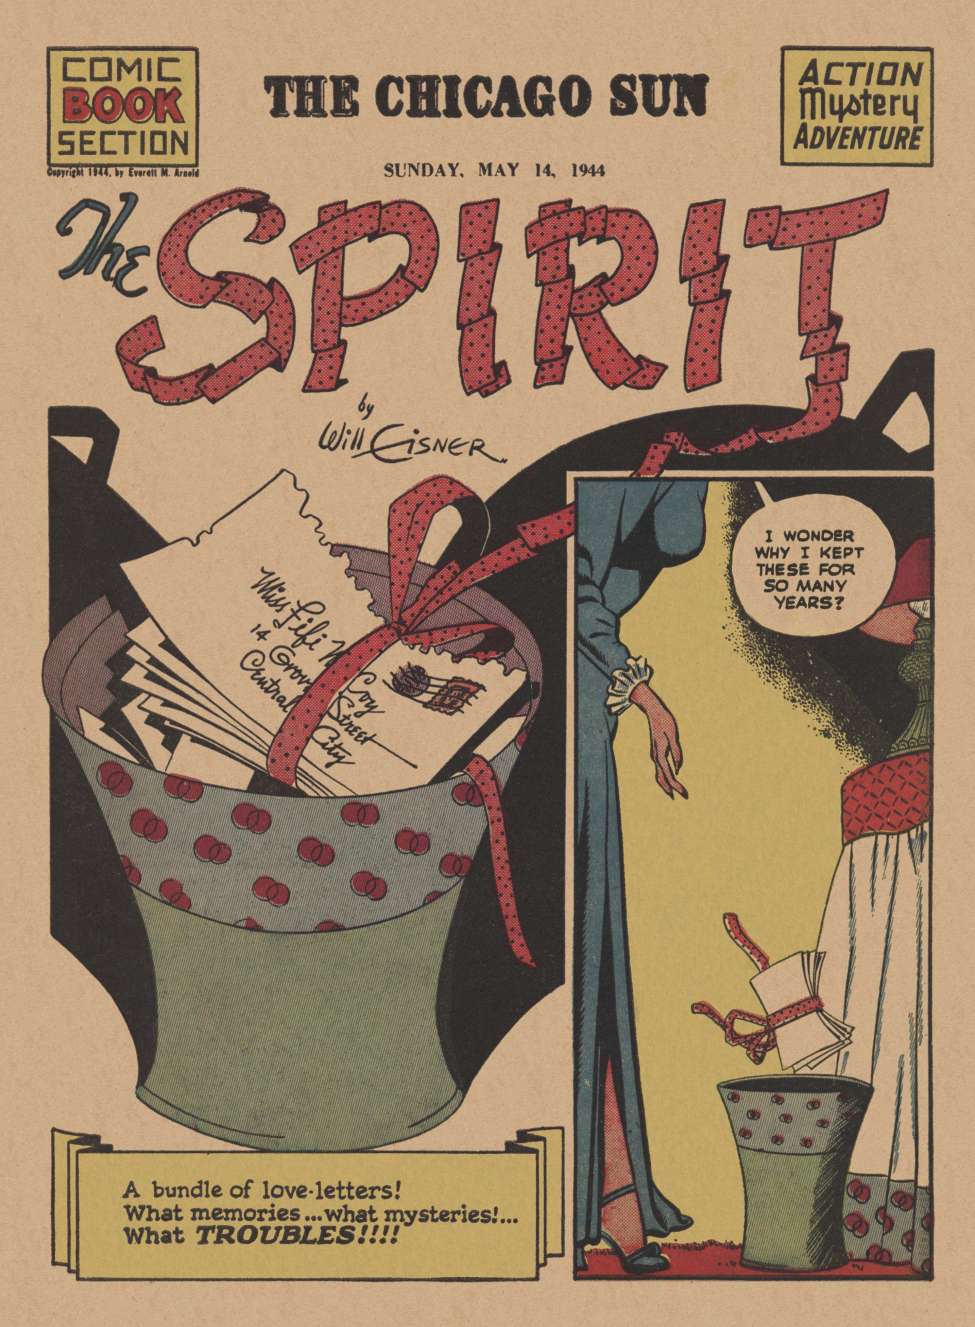 Book Cover For The Spirit (1944-05-14) - Chicago Sun